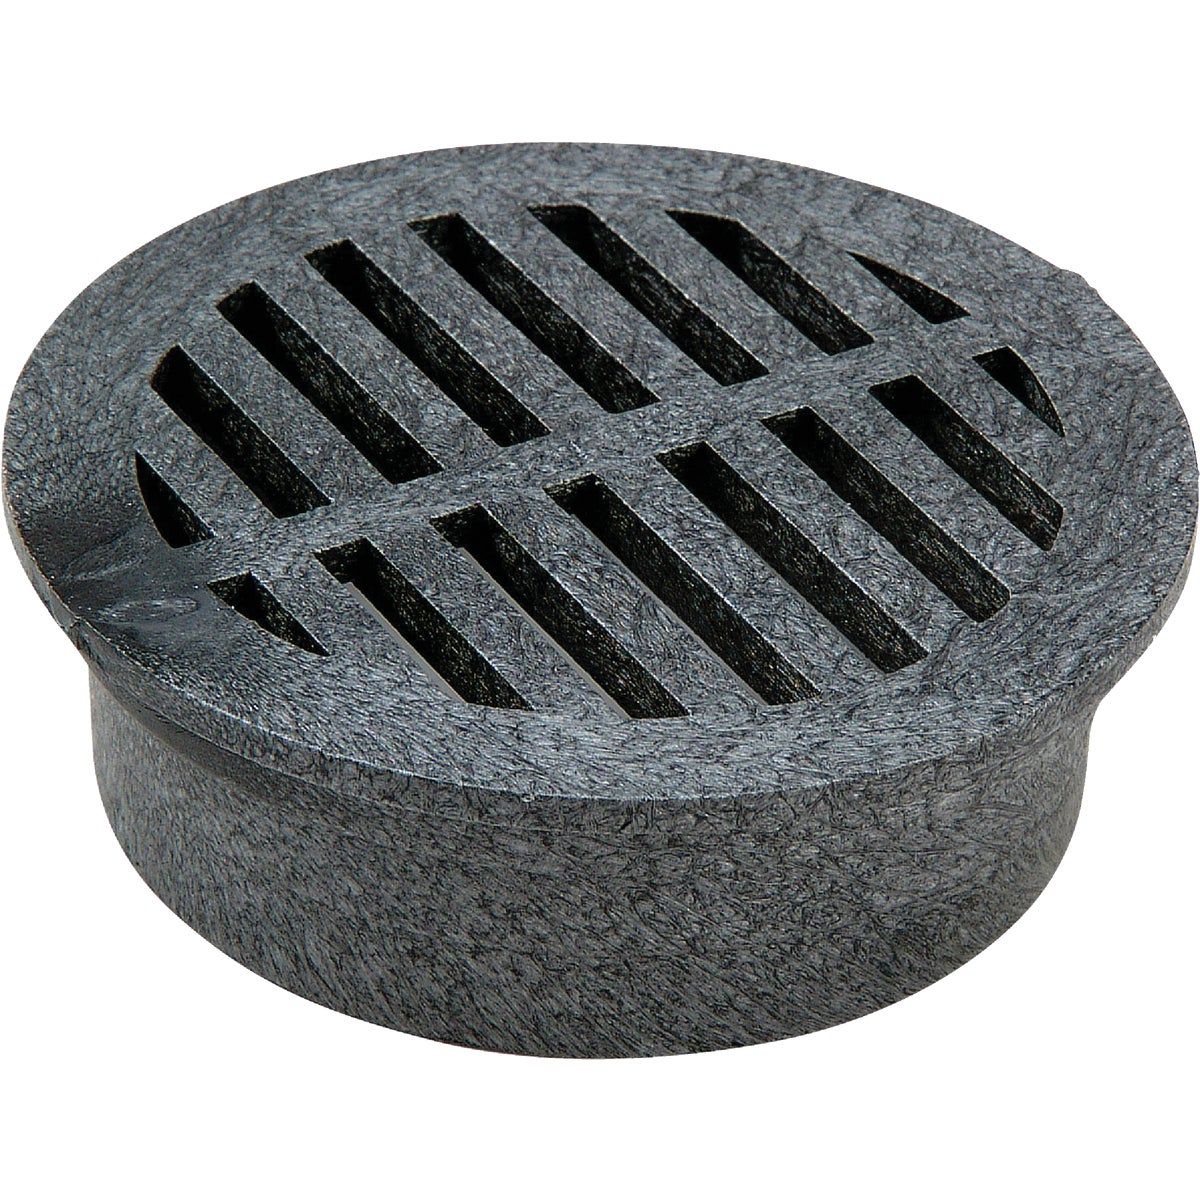 Item 429007, 3 In. round structural foam polyethylene grate with UV inhibitor.